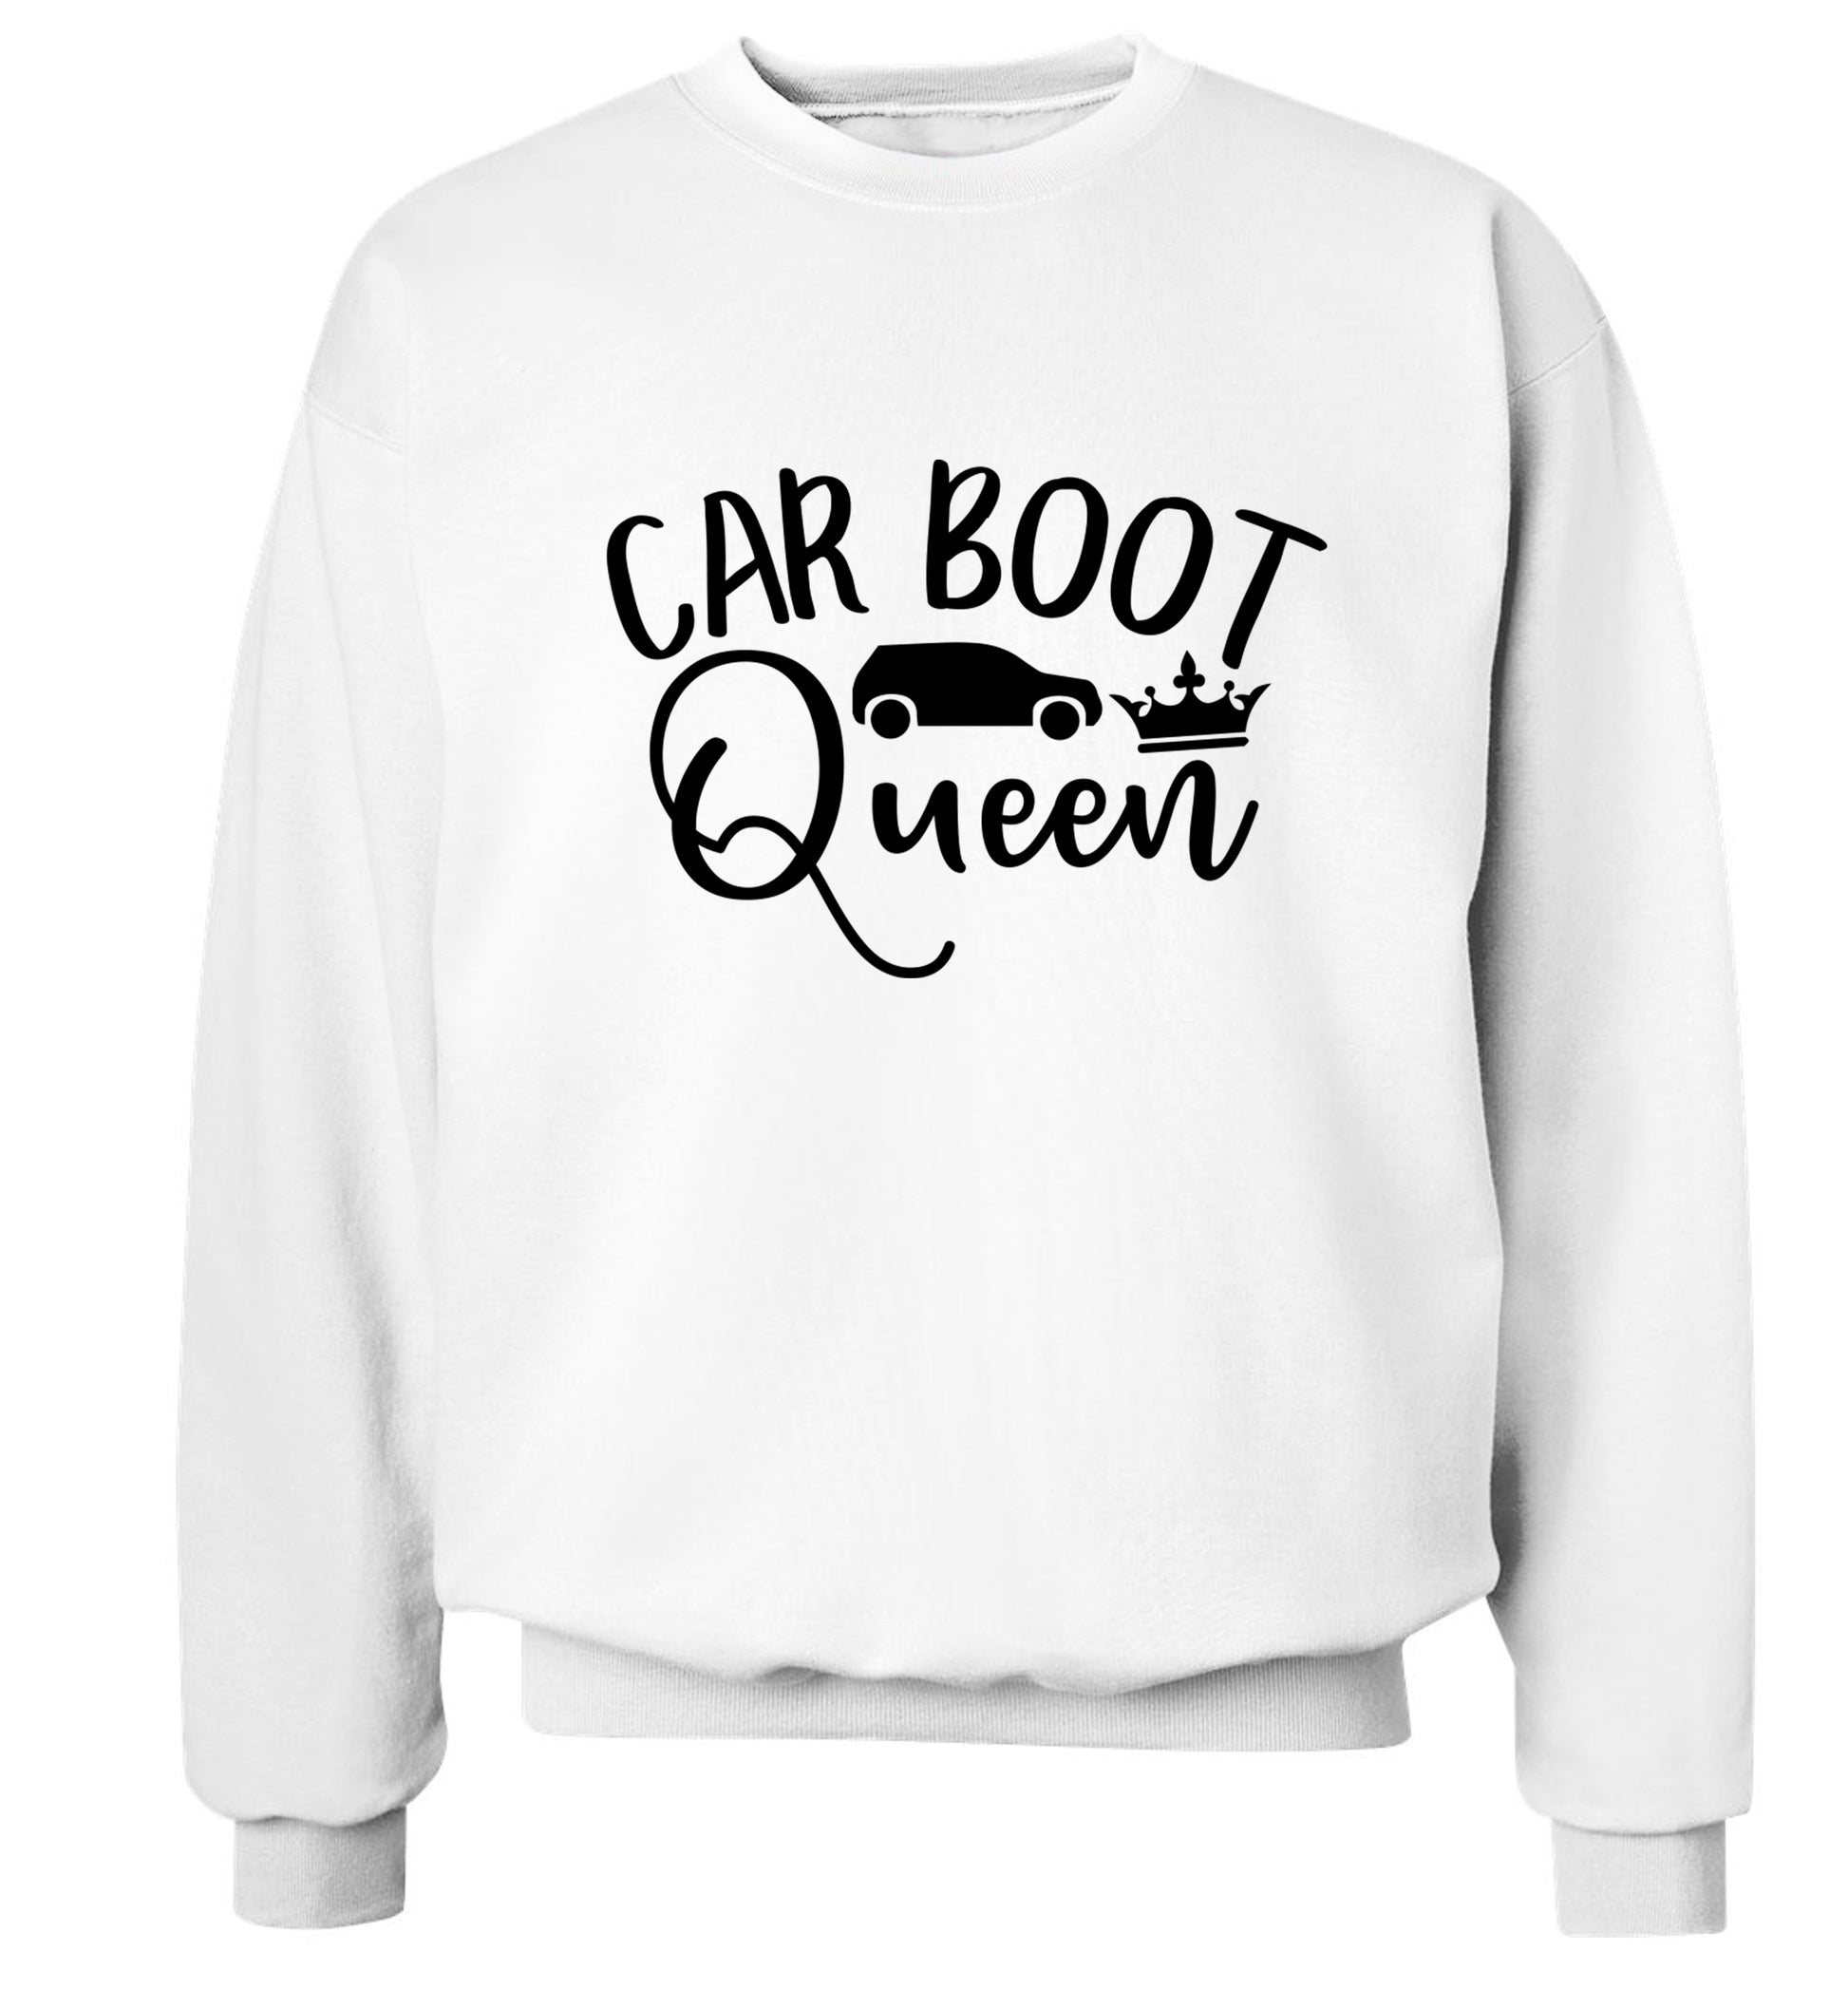 Carboot Queen Adult's unisex white Sweater 2XL